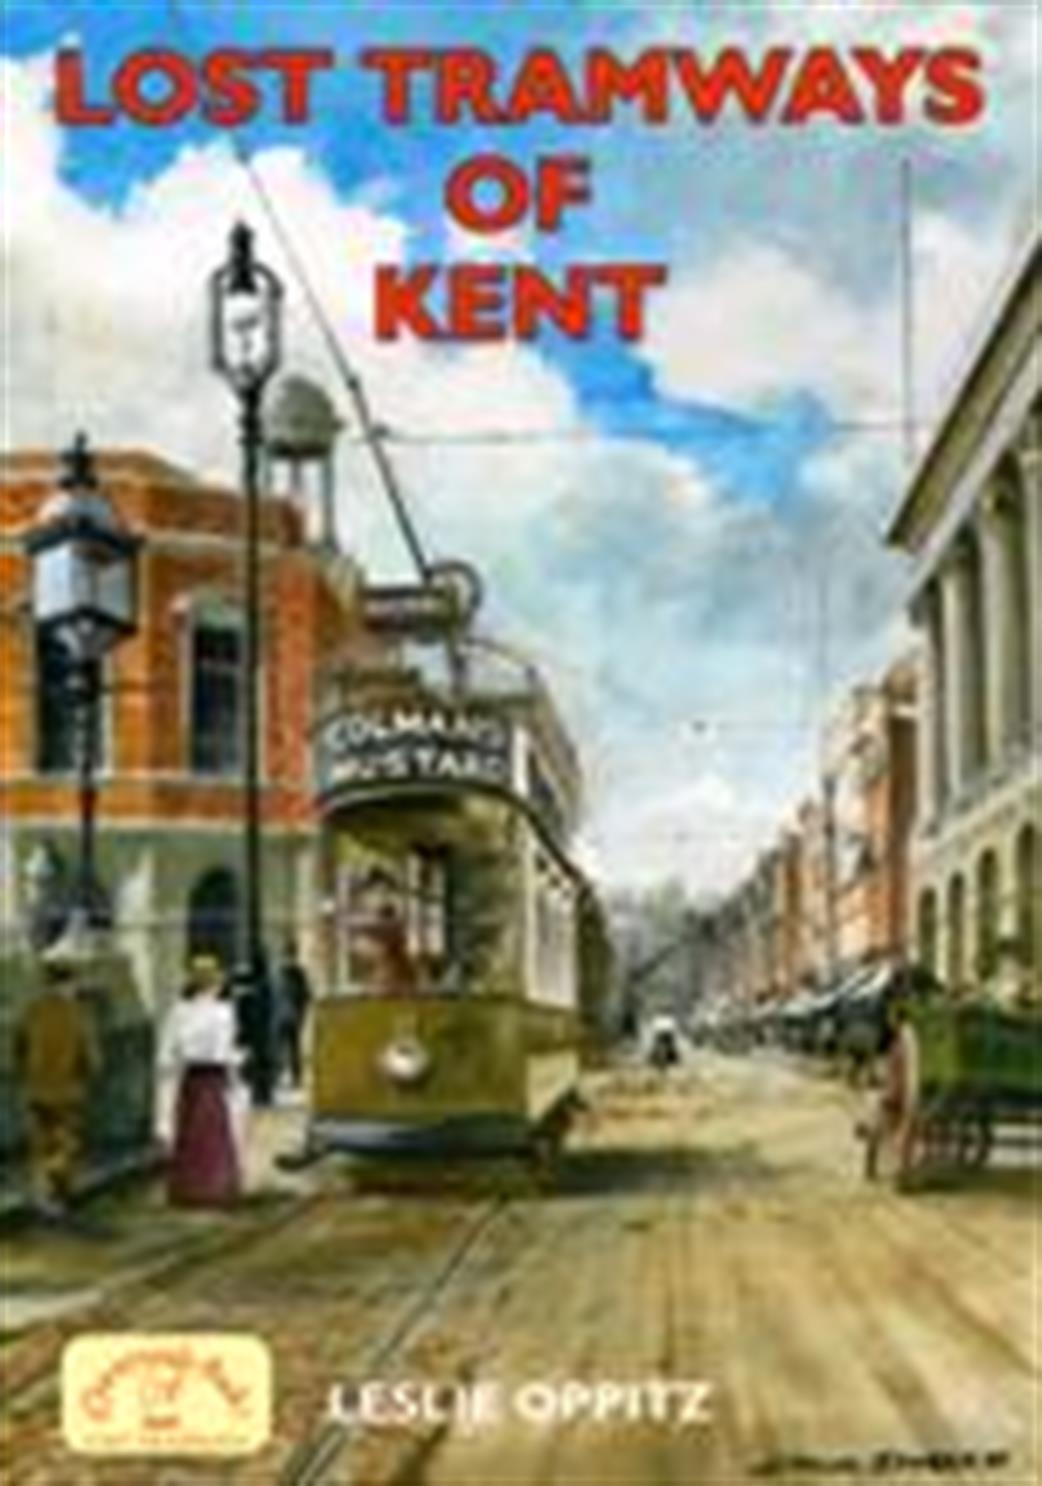 9781853069963 Lost Tramways Of Kent by Leslie Oppitz